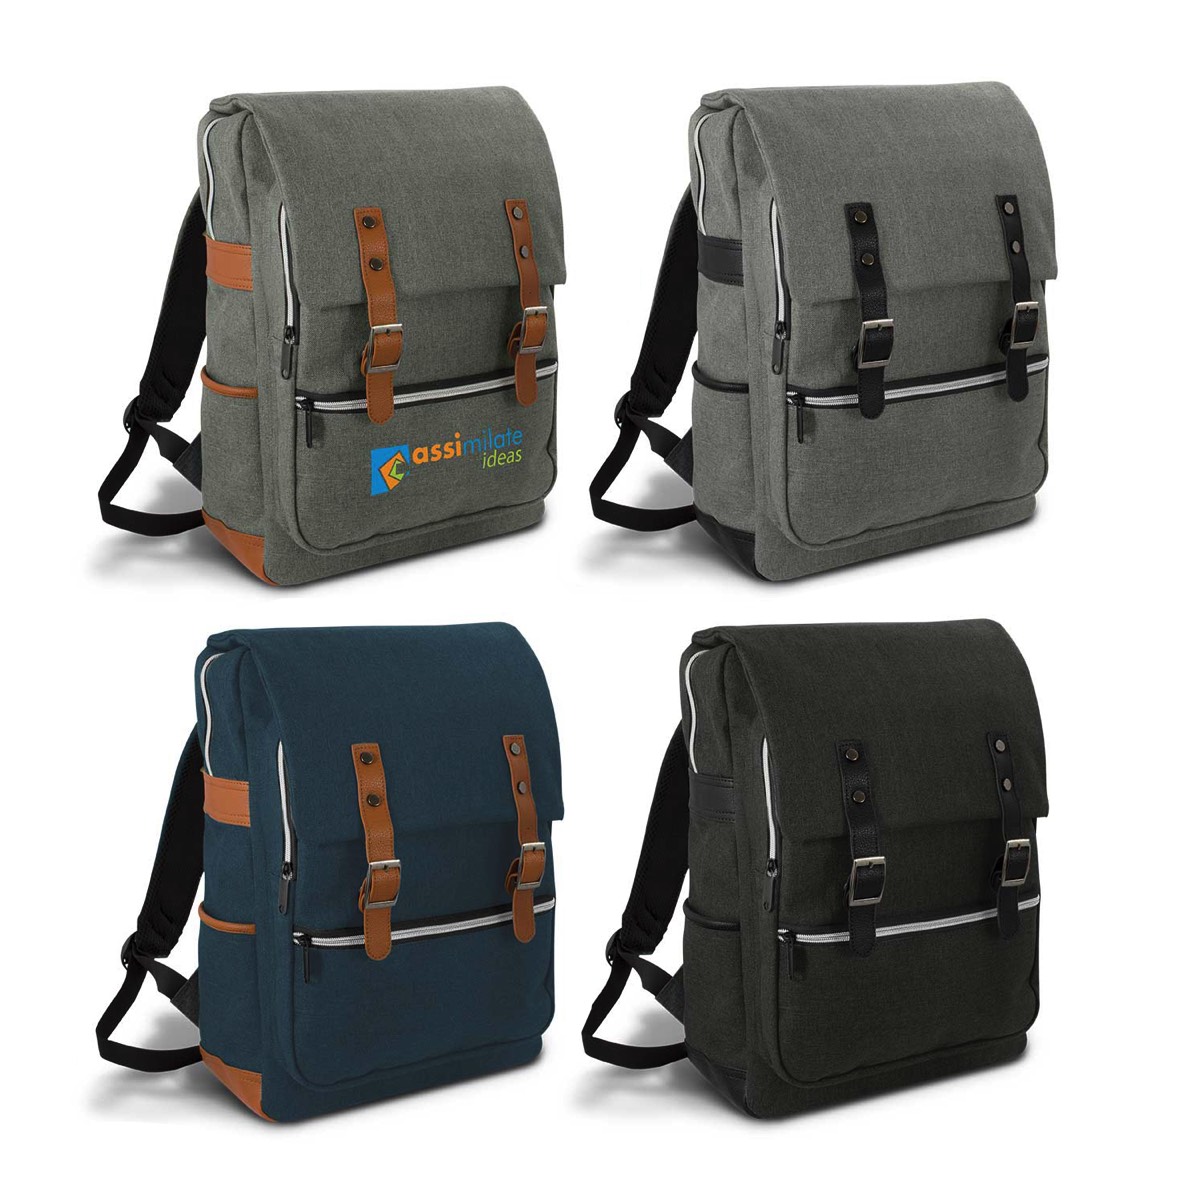 elevate backpacks available